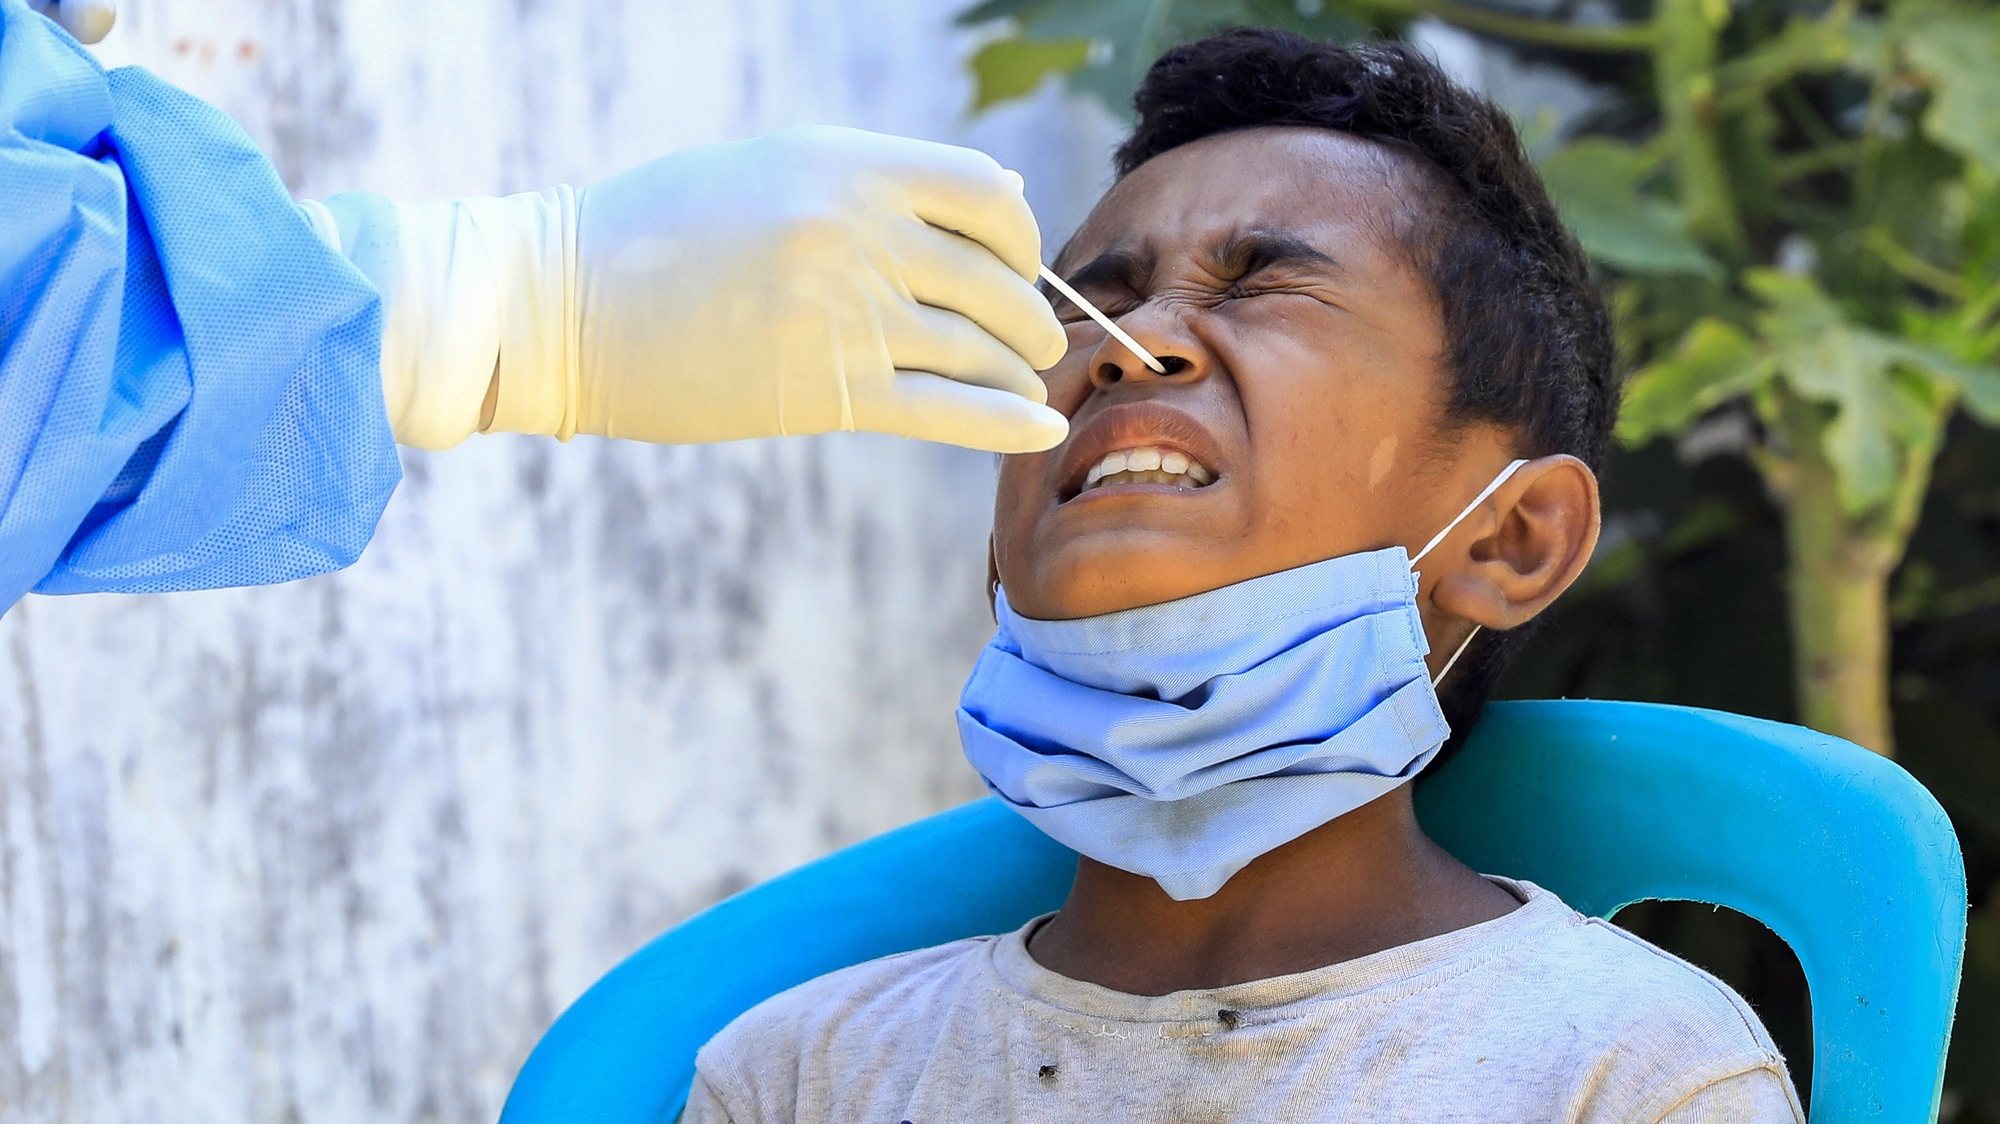 epa09079361 A boy reacts as a healthcare worker collects his specimen samples during a COVID-19 swab test in Dili, East Timor, also known as Timor Leste, 17 March 2021. With less than 300 COVID-19 cases and zero deaths, Timor Leste recorded the second-smallest outbreak in Southeast Asia after Laos. The country imposed a state of emergency a week after the Catholic-majority nation reported its first case on 21 March 2020, and enforced strict border controls.  EPA/ANTONIO DASIPARU